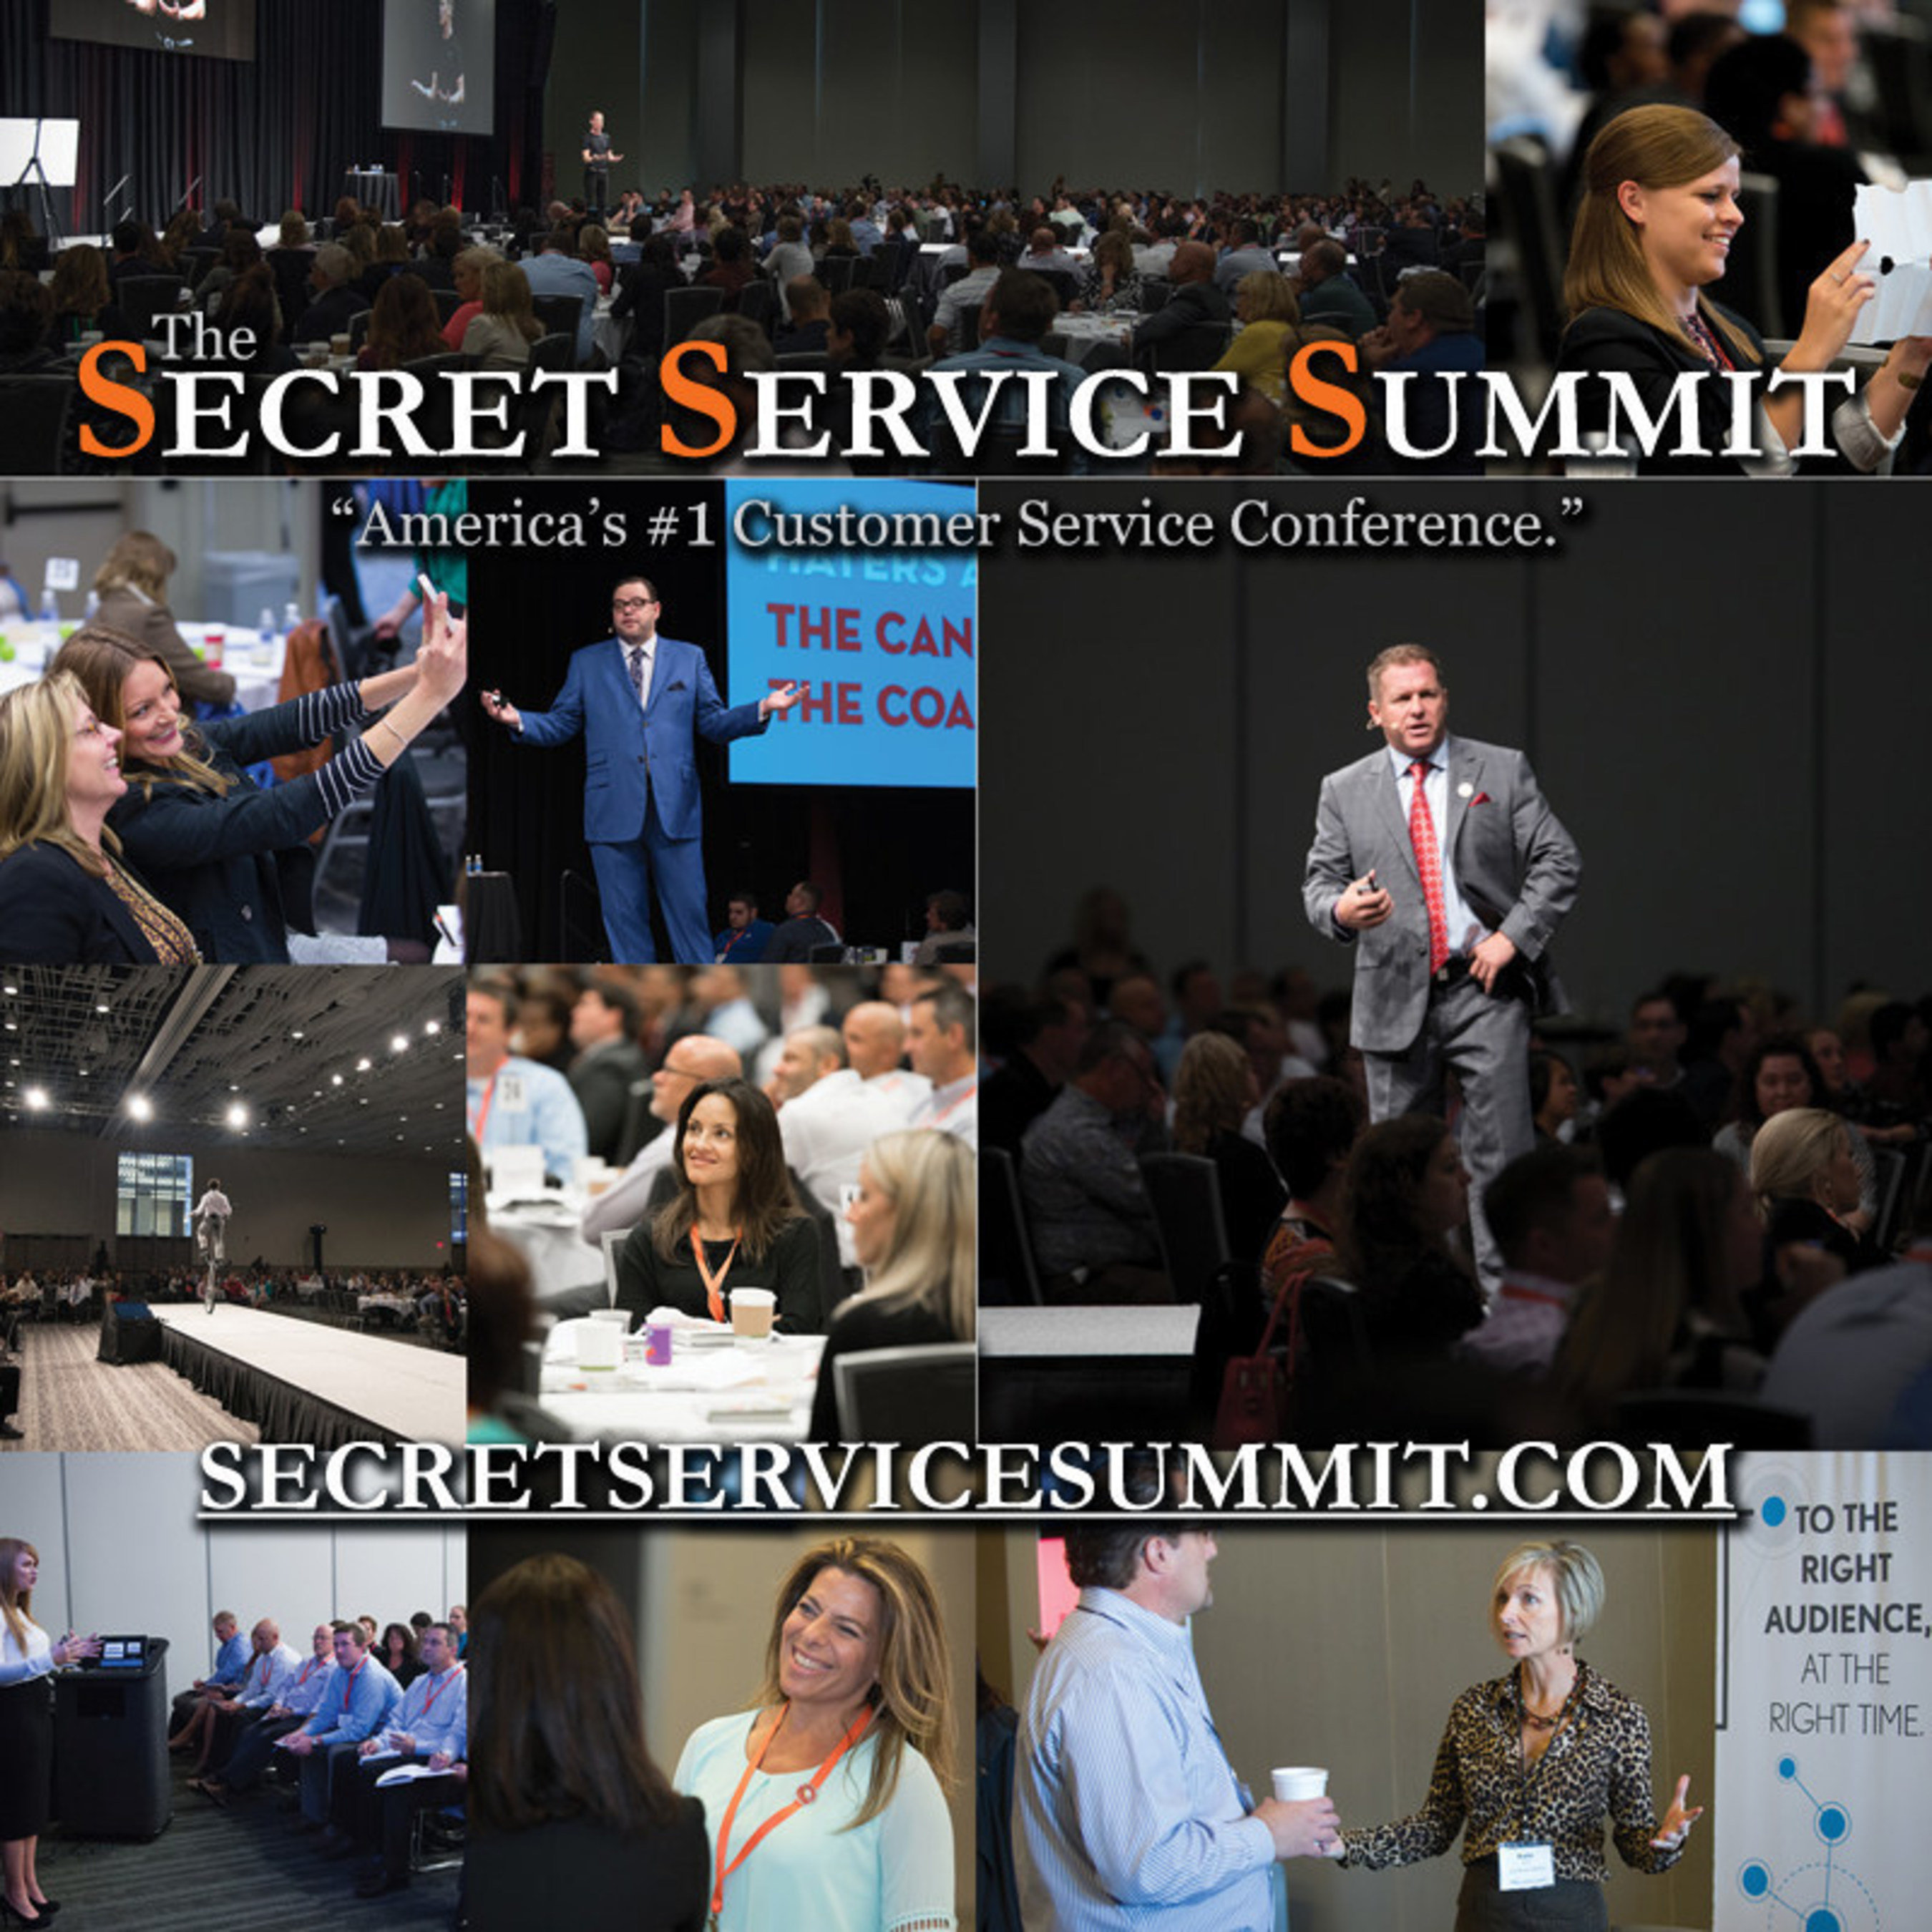 Top Customer Experience Leaders Gather for Secret Service Summit Conference in Cleveland